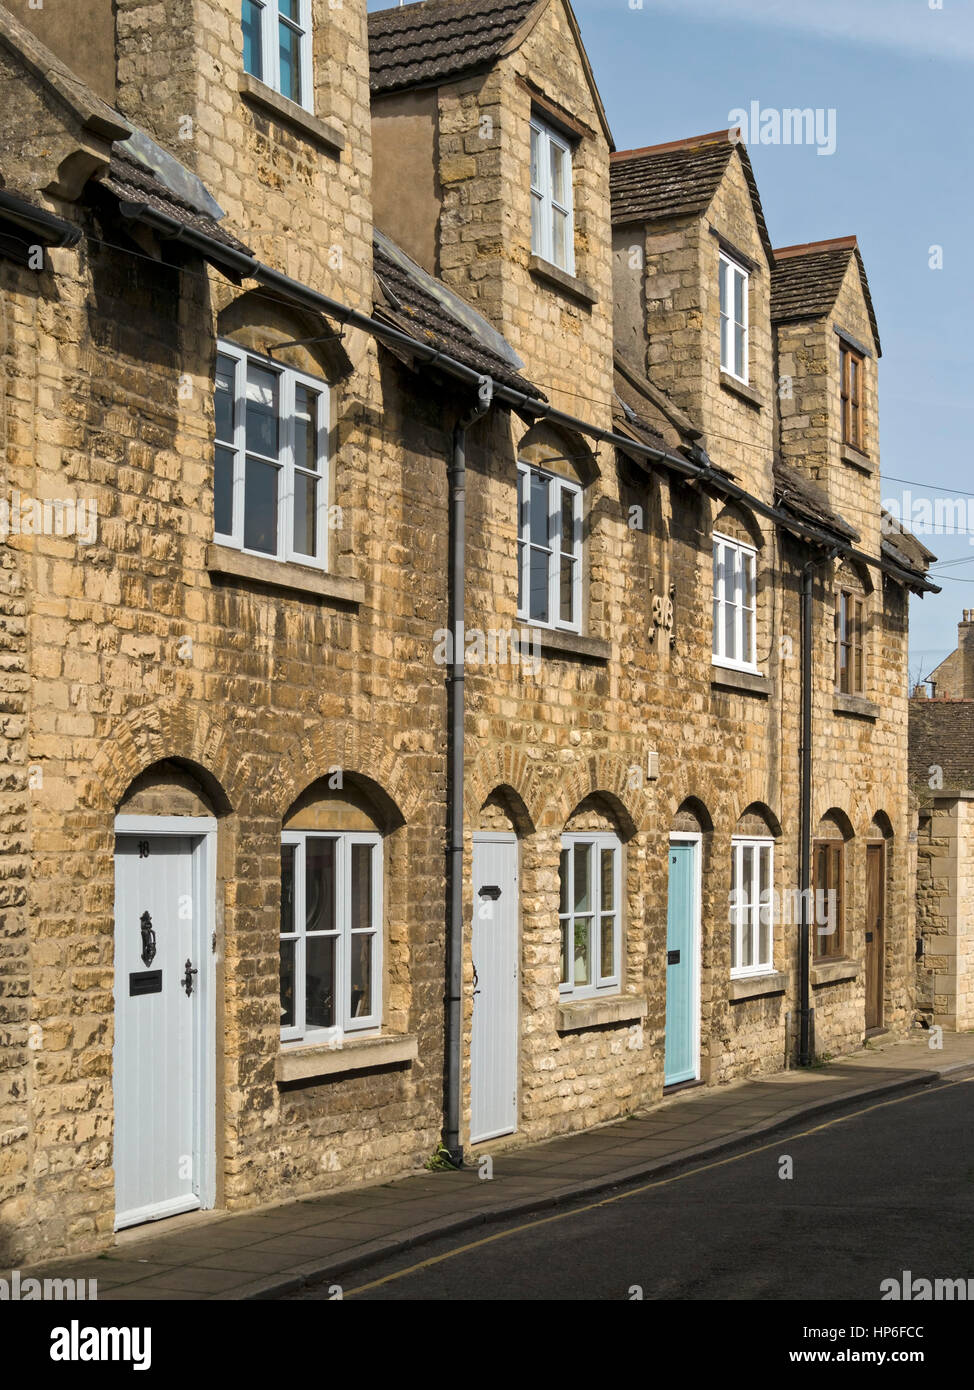 Row of old stone terraced cottages with arch window and front door features, Austin Street, Stamford, Lincolnshire, England, UK. Stock Photo